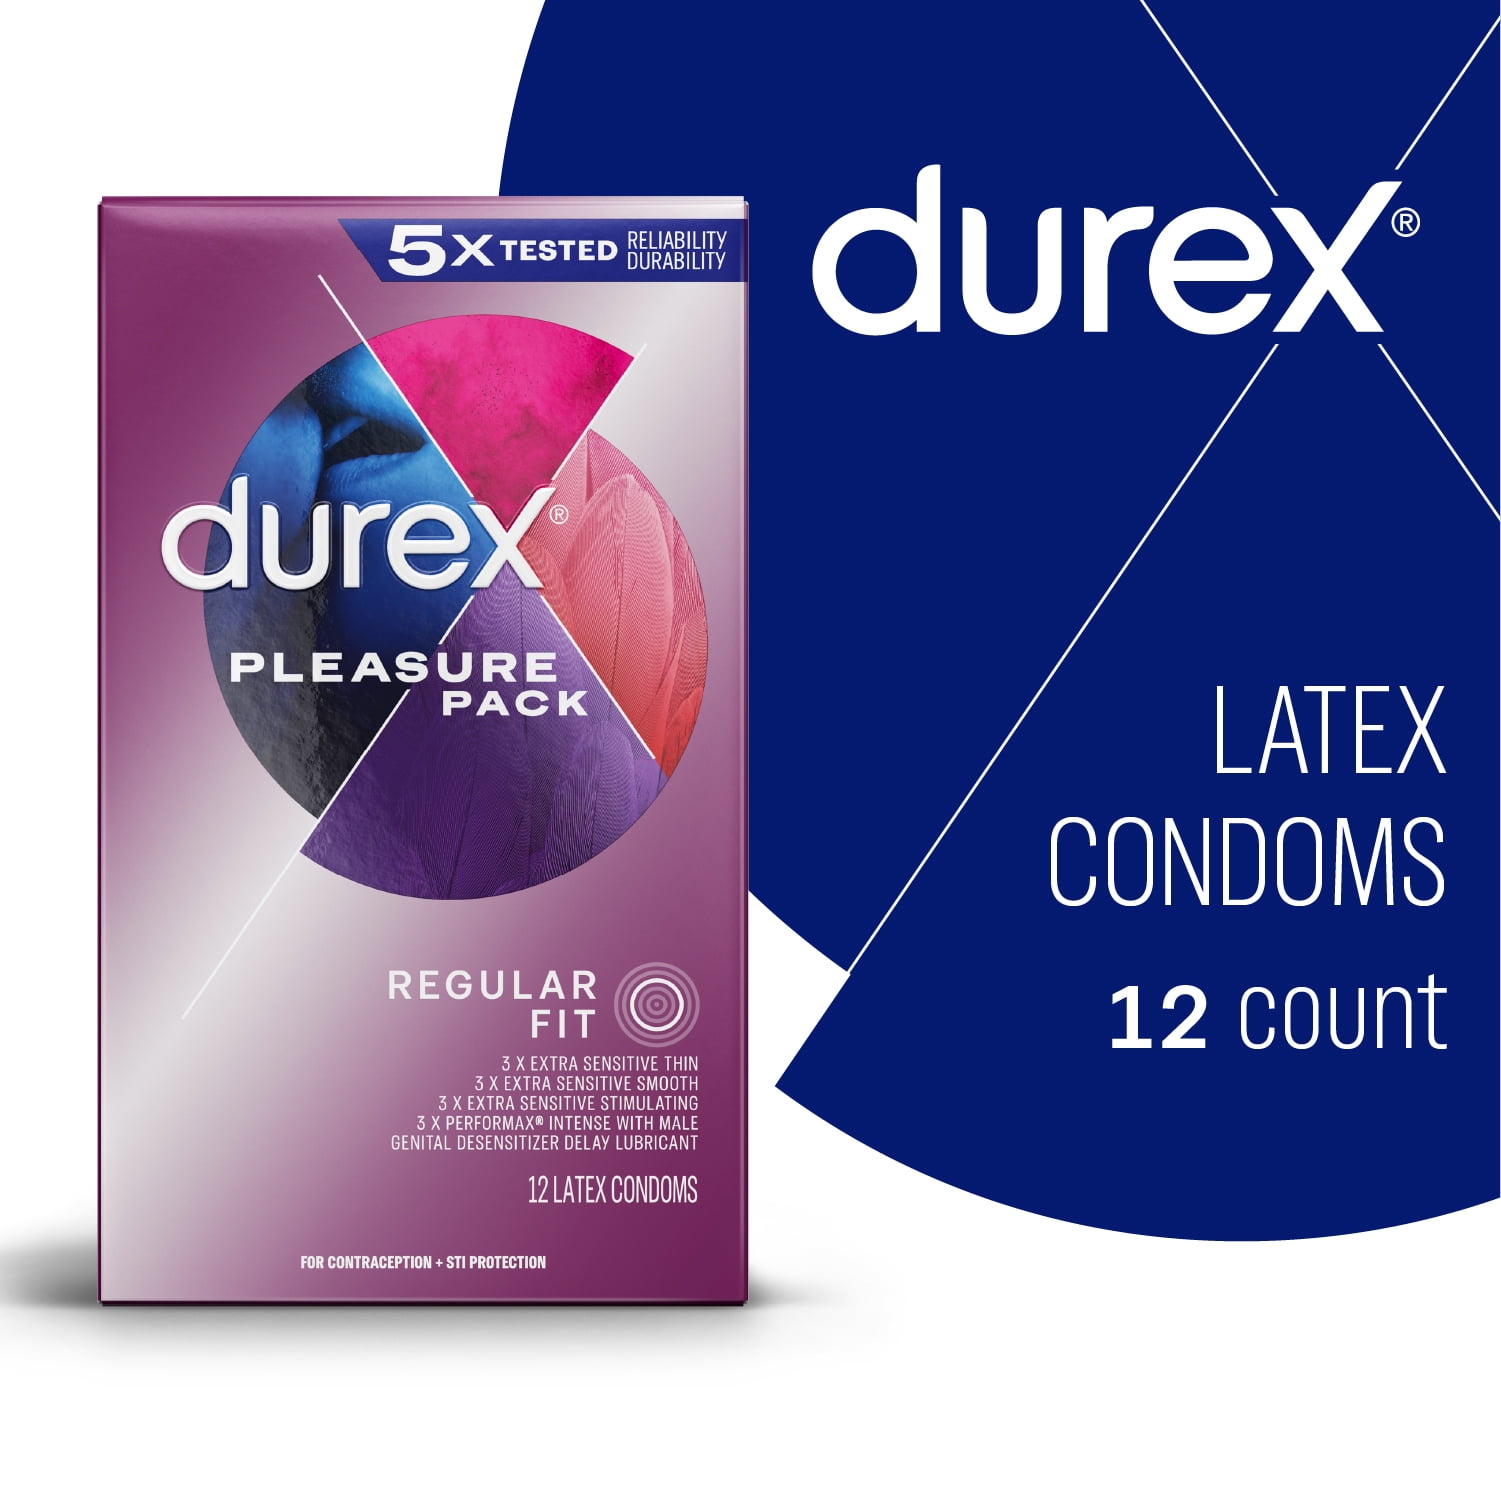 Durex Pleasure Pack Assorted Condoms, Exciting Mix of Sensation and Stimulation, Natural Rubber Latex Condoms for Men, FSA and HSA Eligible, 12 Count